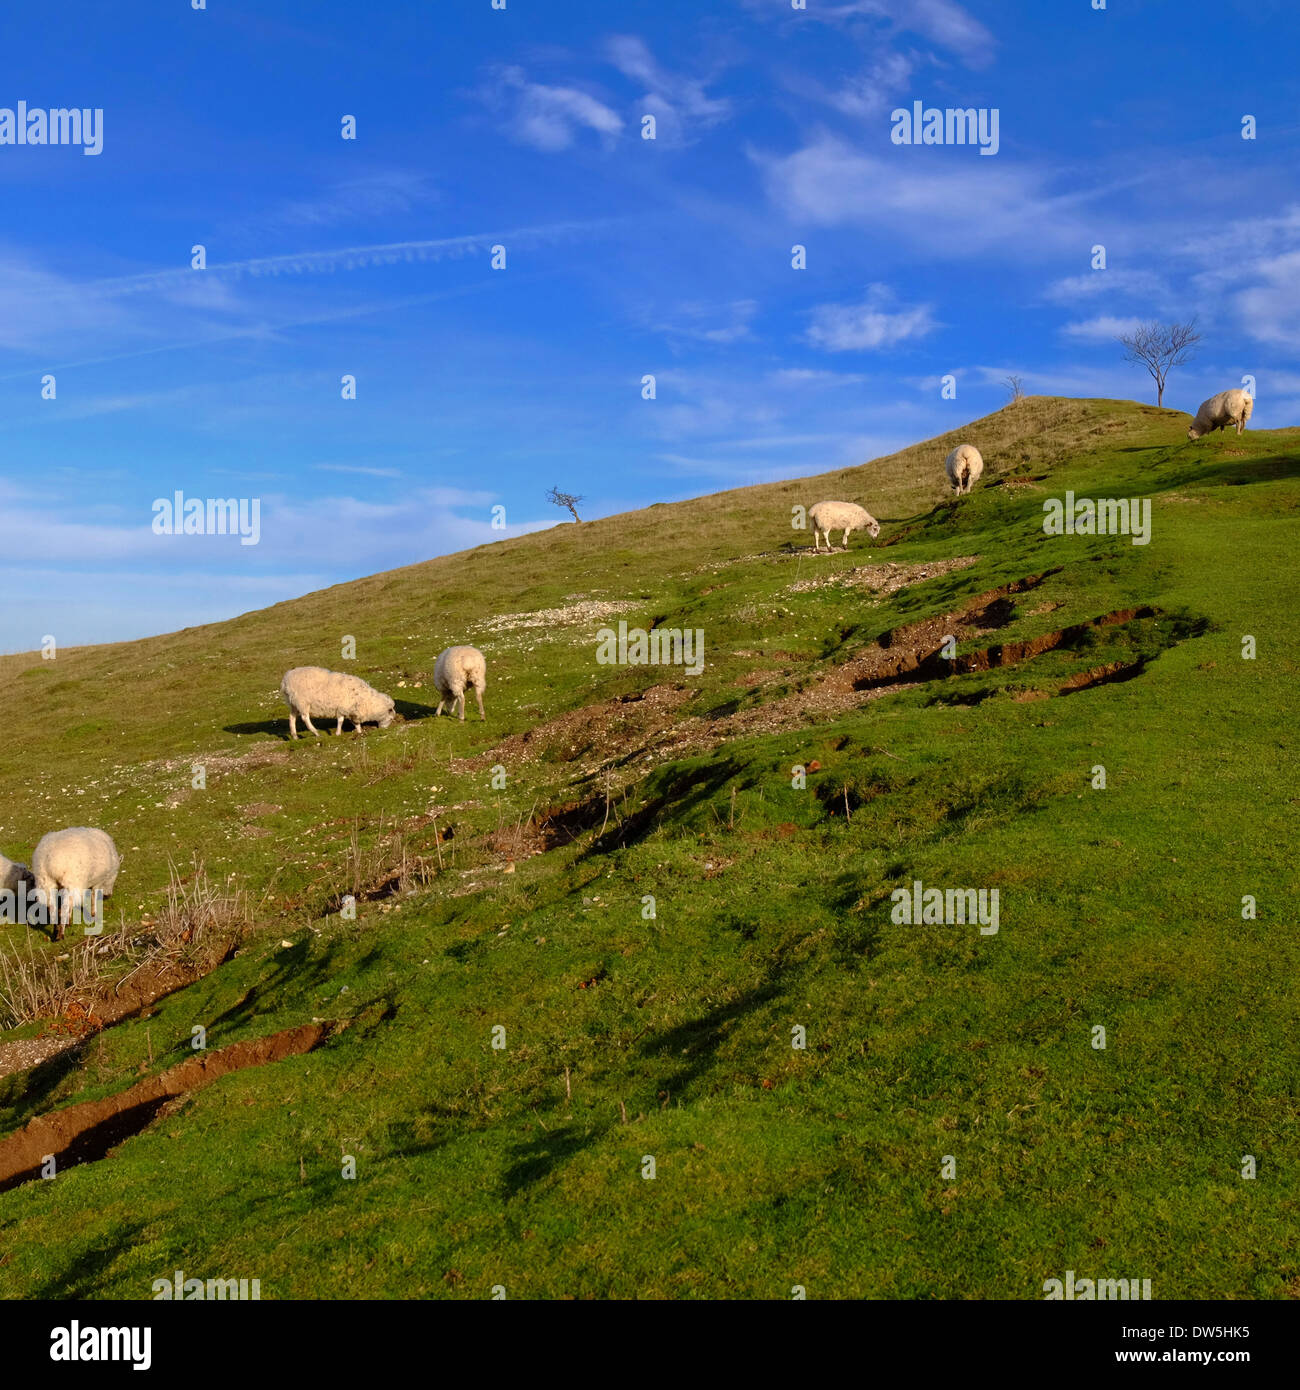 Sheep grazing on a steep hill in Bedfordshire Stock Photo